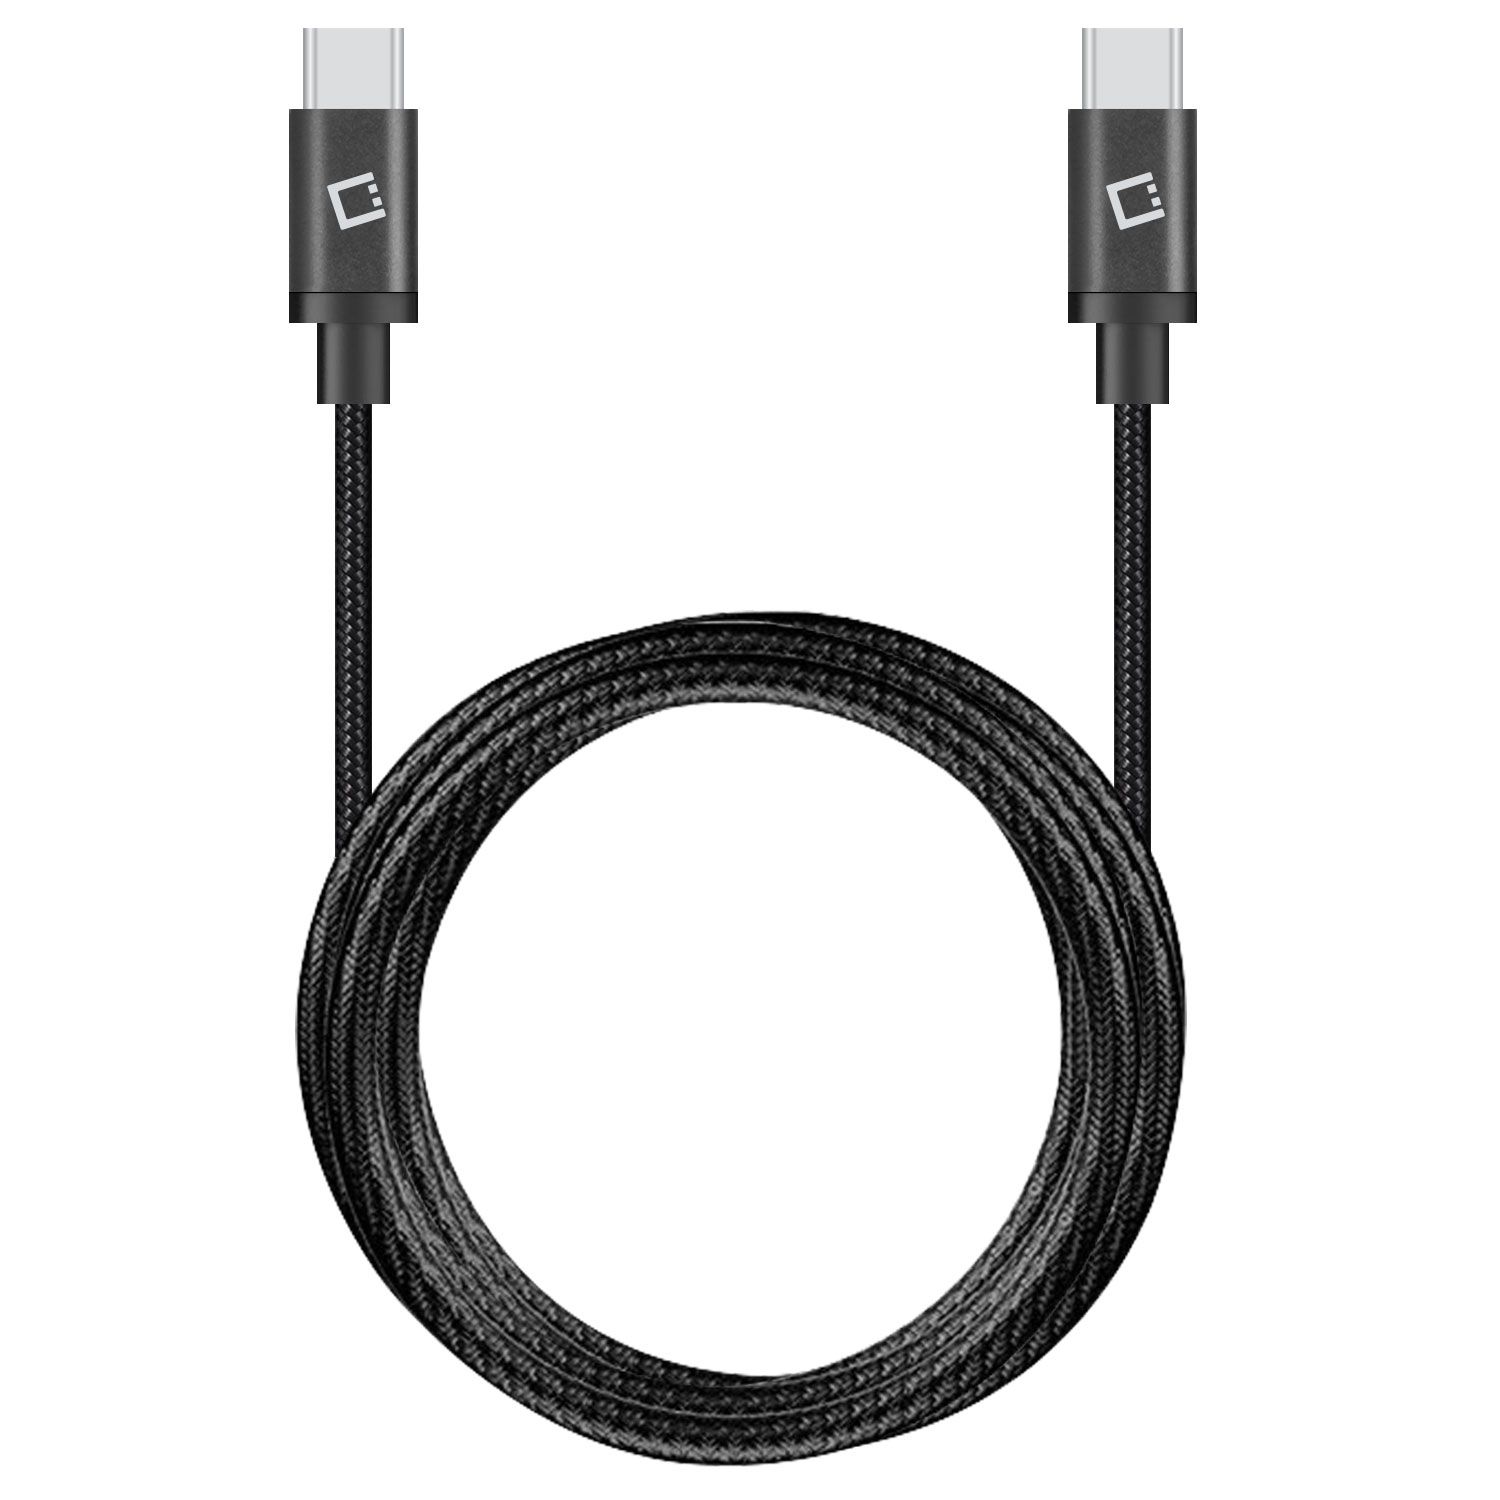 Cellet USB-C to USB-C Cable Compatible with Samsung Galaxy S20, S20+ Plus, S20 Ultra, Heavy Duty Braided USB Type-C to Type-C Cable (6 feet/1.8 meters) and Atom Wipe - image 1 of 9